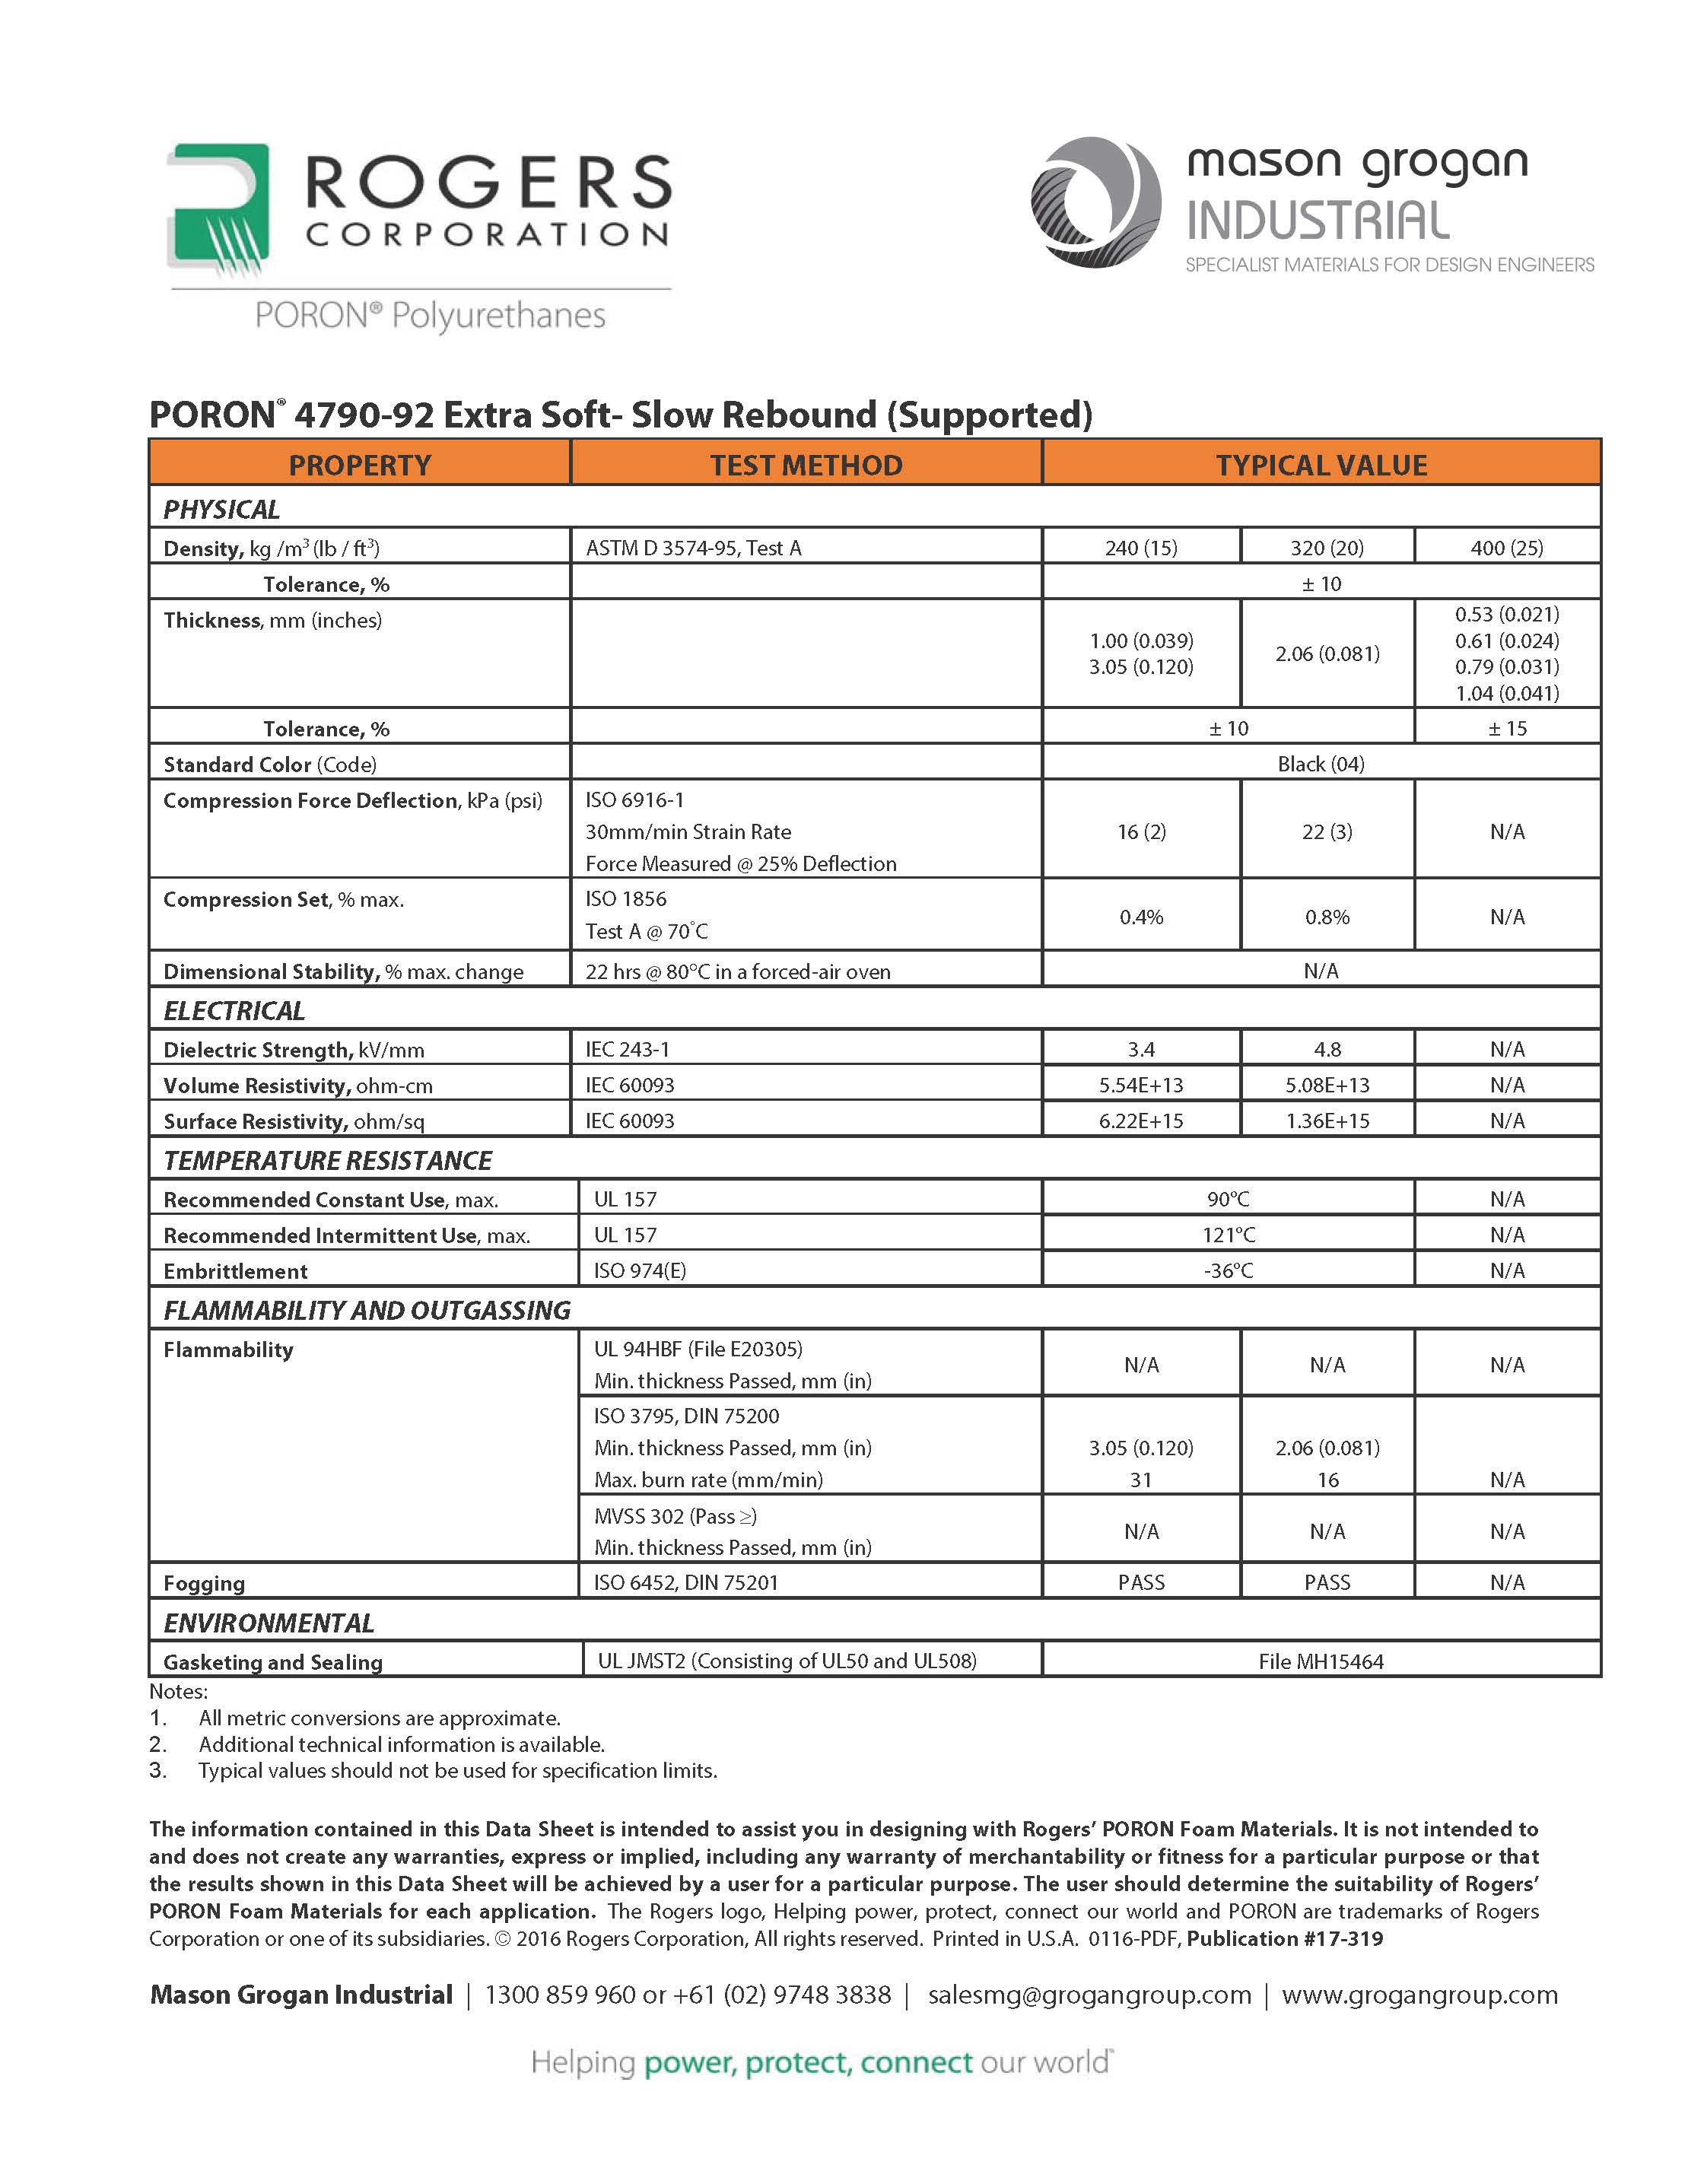 PORON® 4790-92 Extra-Soft Slow-Rebound Supported Global Standards Data Sheet